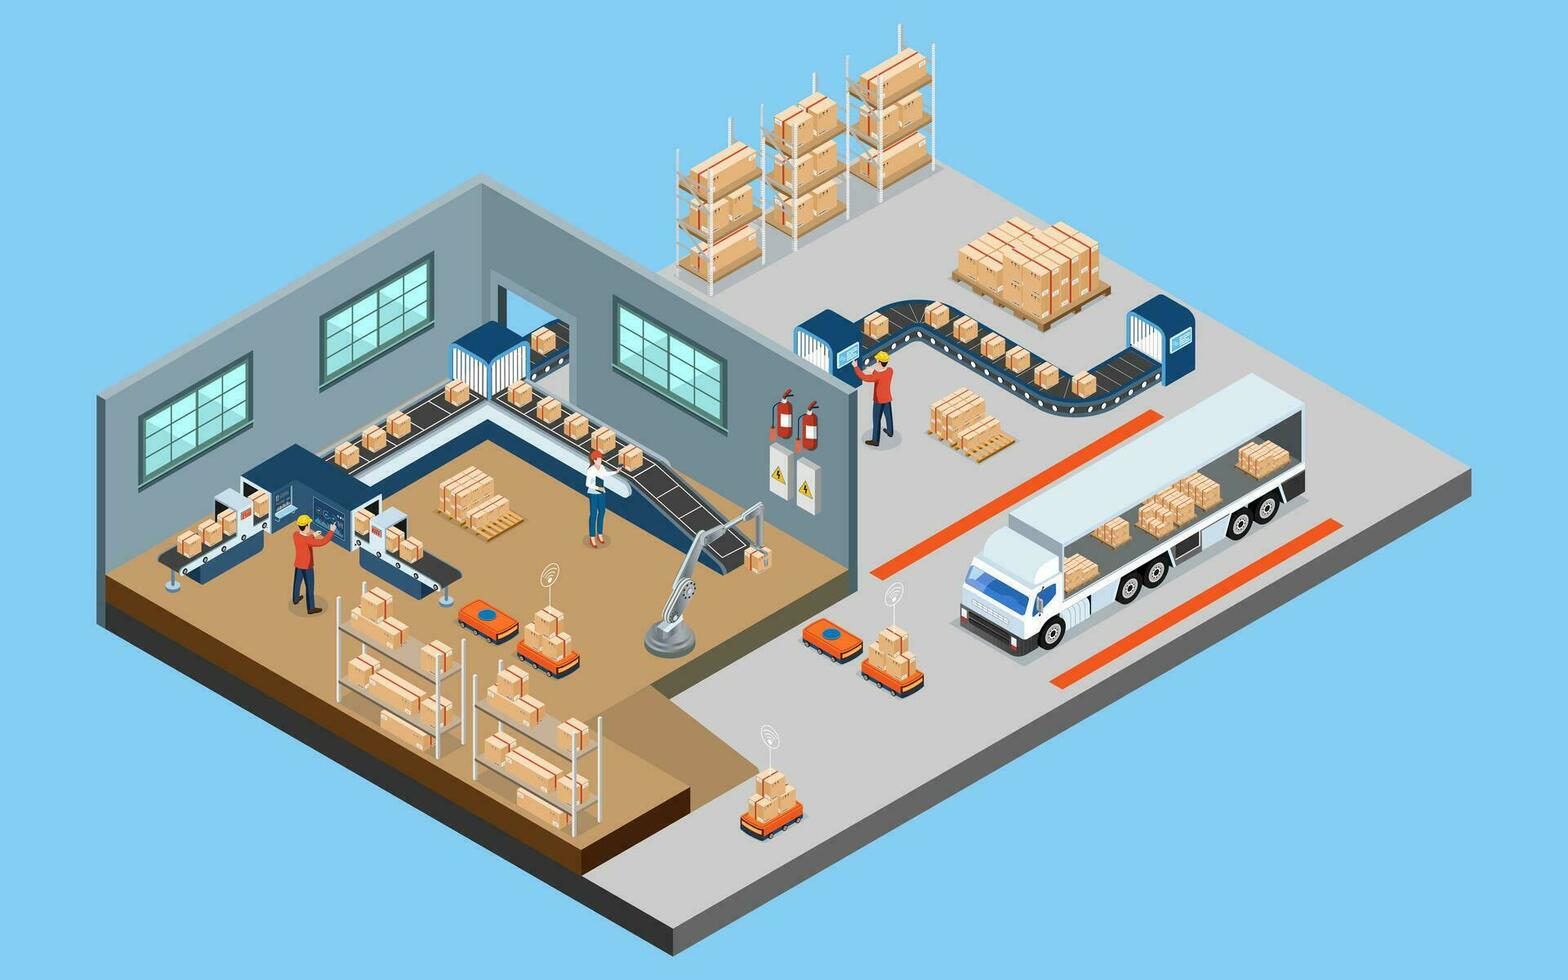 Smart Warehouse Technology and Automated Warehouse Robots Concept with Industry 4.0, Warehouse Automation System and Autonomous Robot Transportation operation service. Vector illustration EPS 10